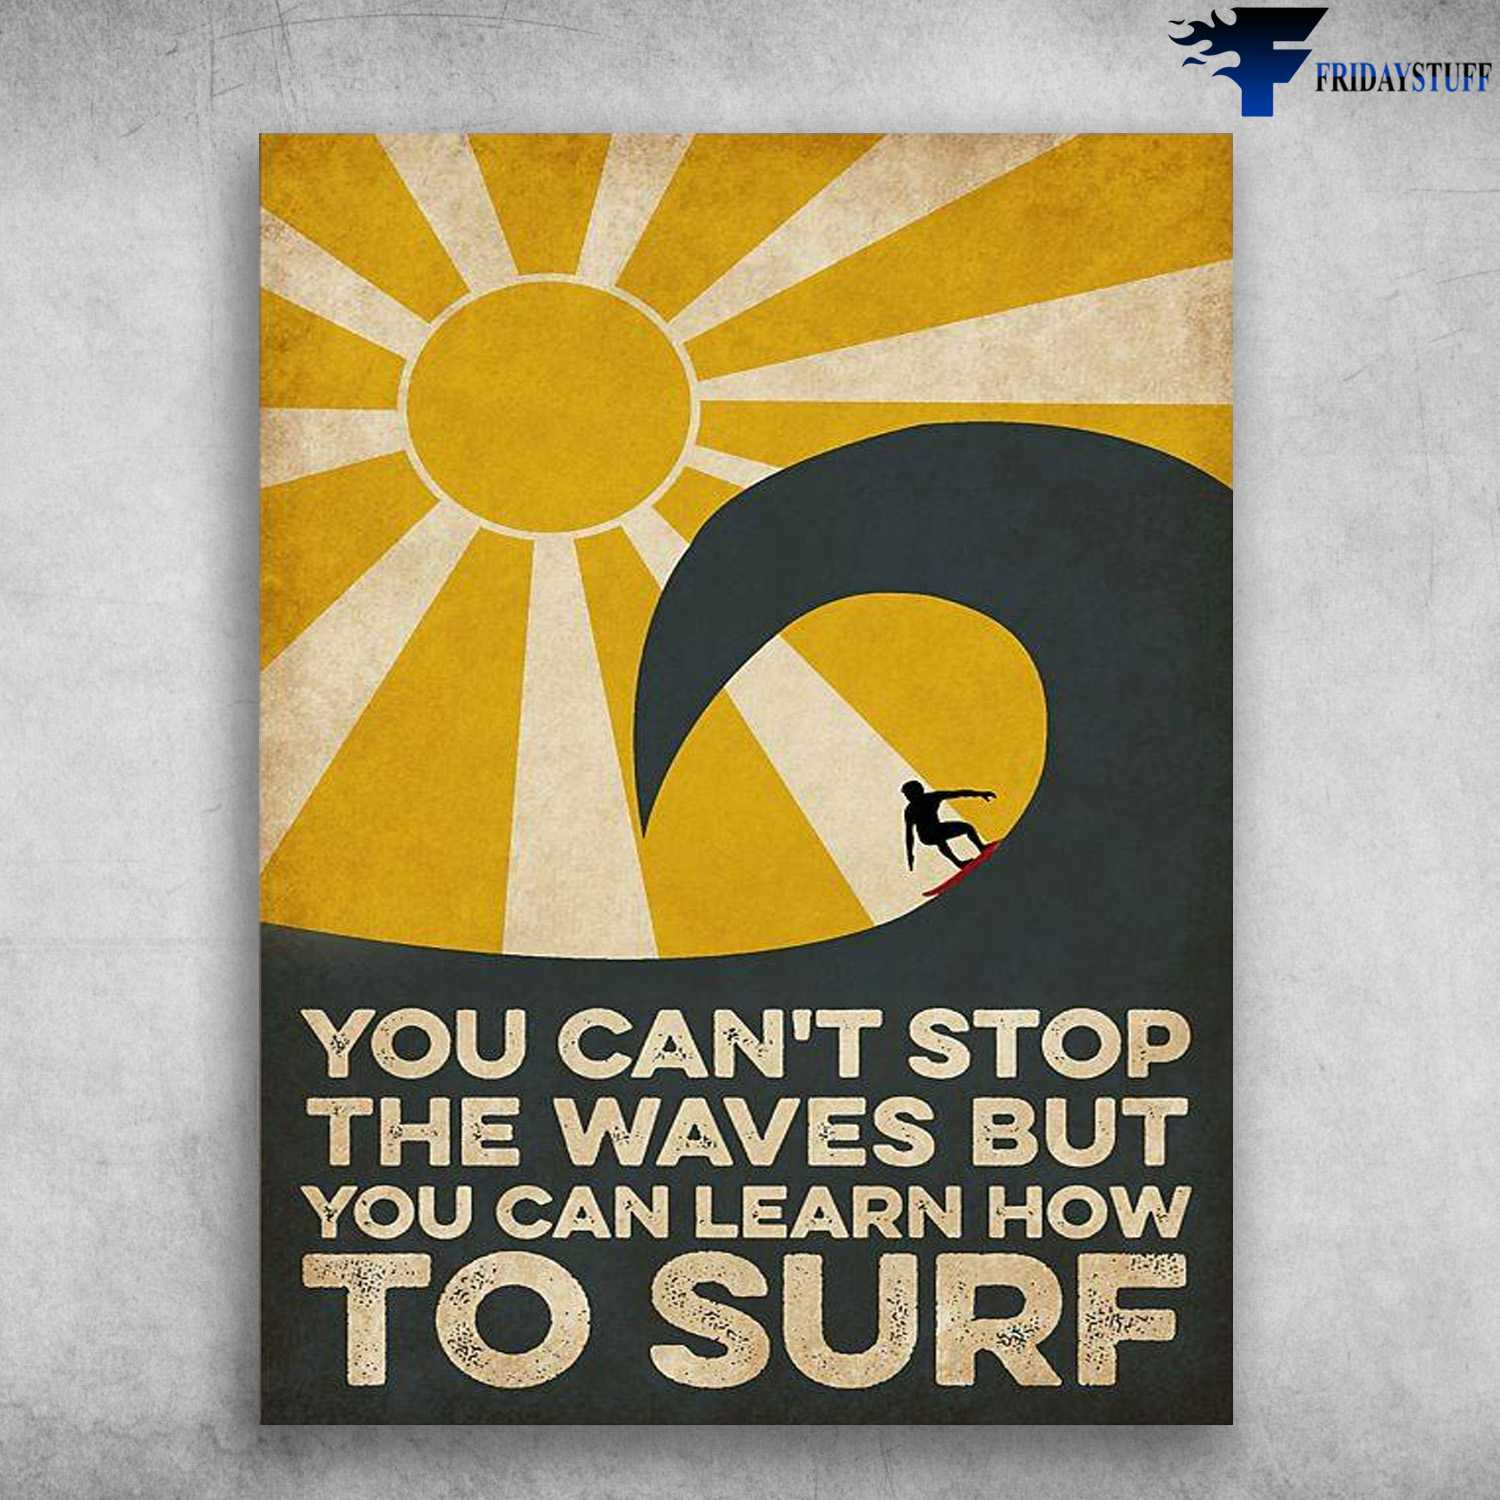 Surfing Man - You Can't Stop The Waves, But You Can Learn How To Surf